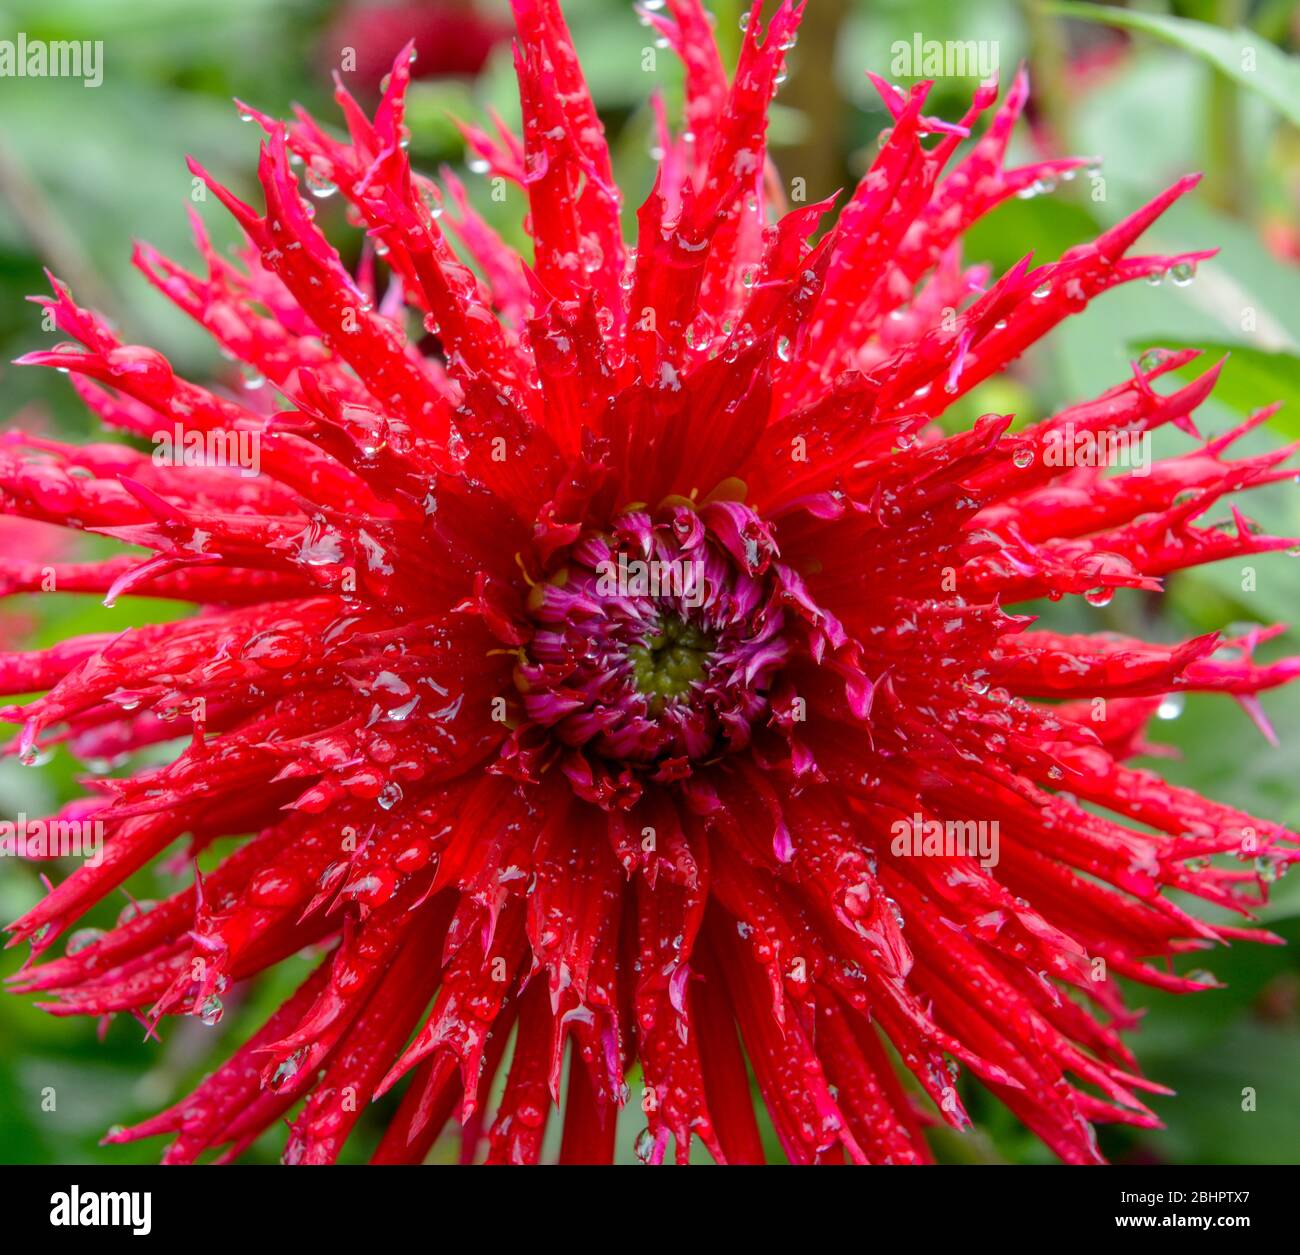 Close up of a single red Dahlia flower head with drops of water on the flower petals Stock Photo